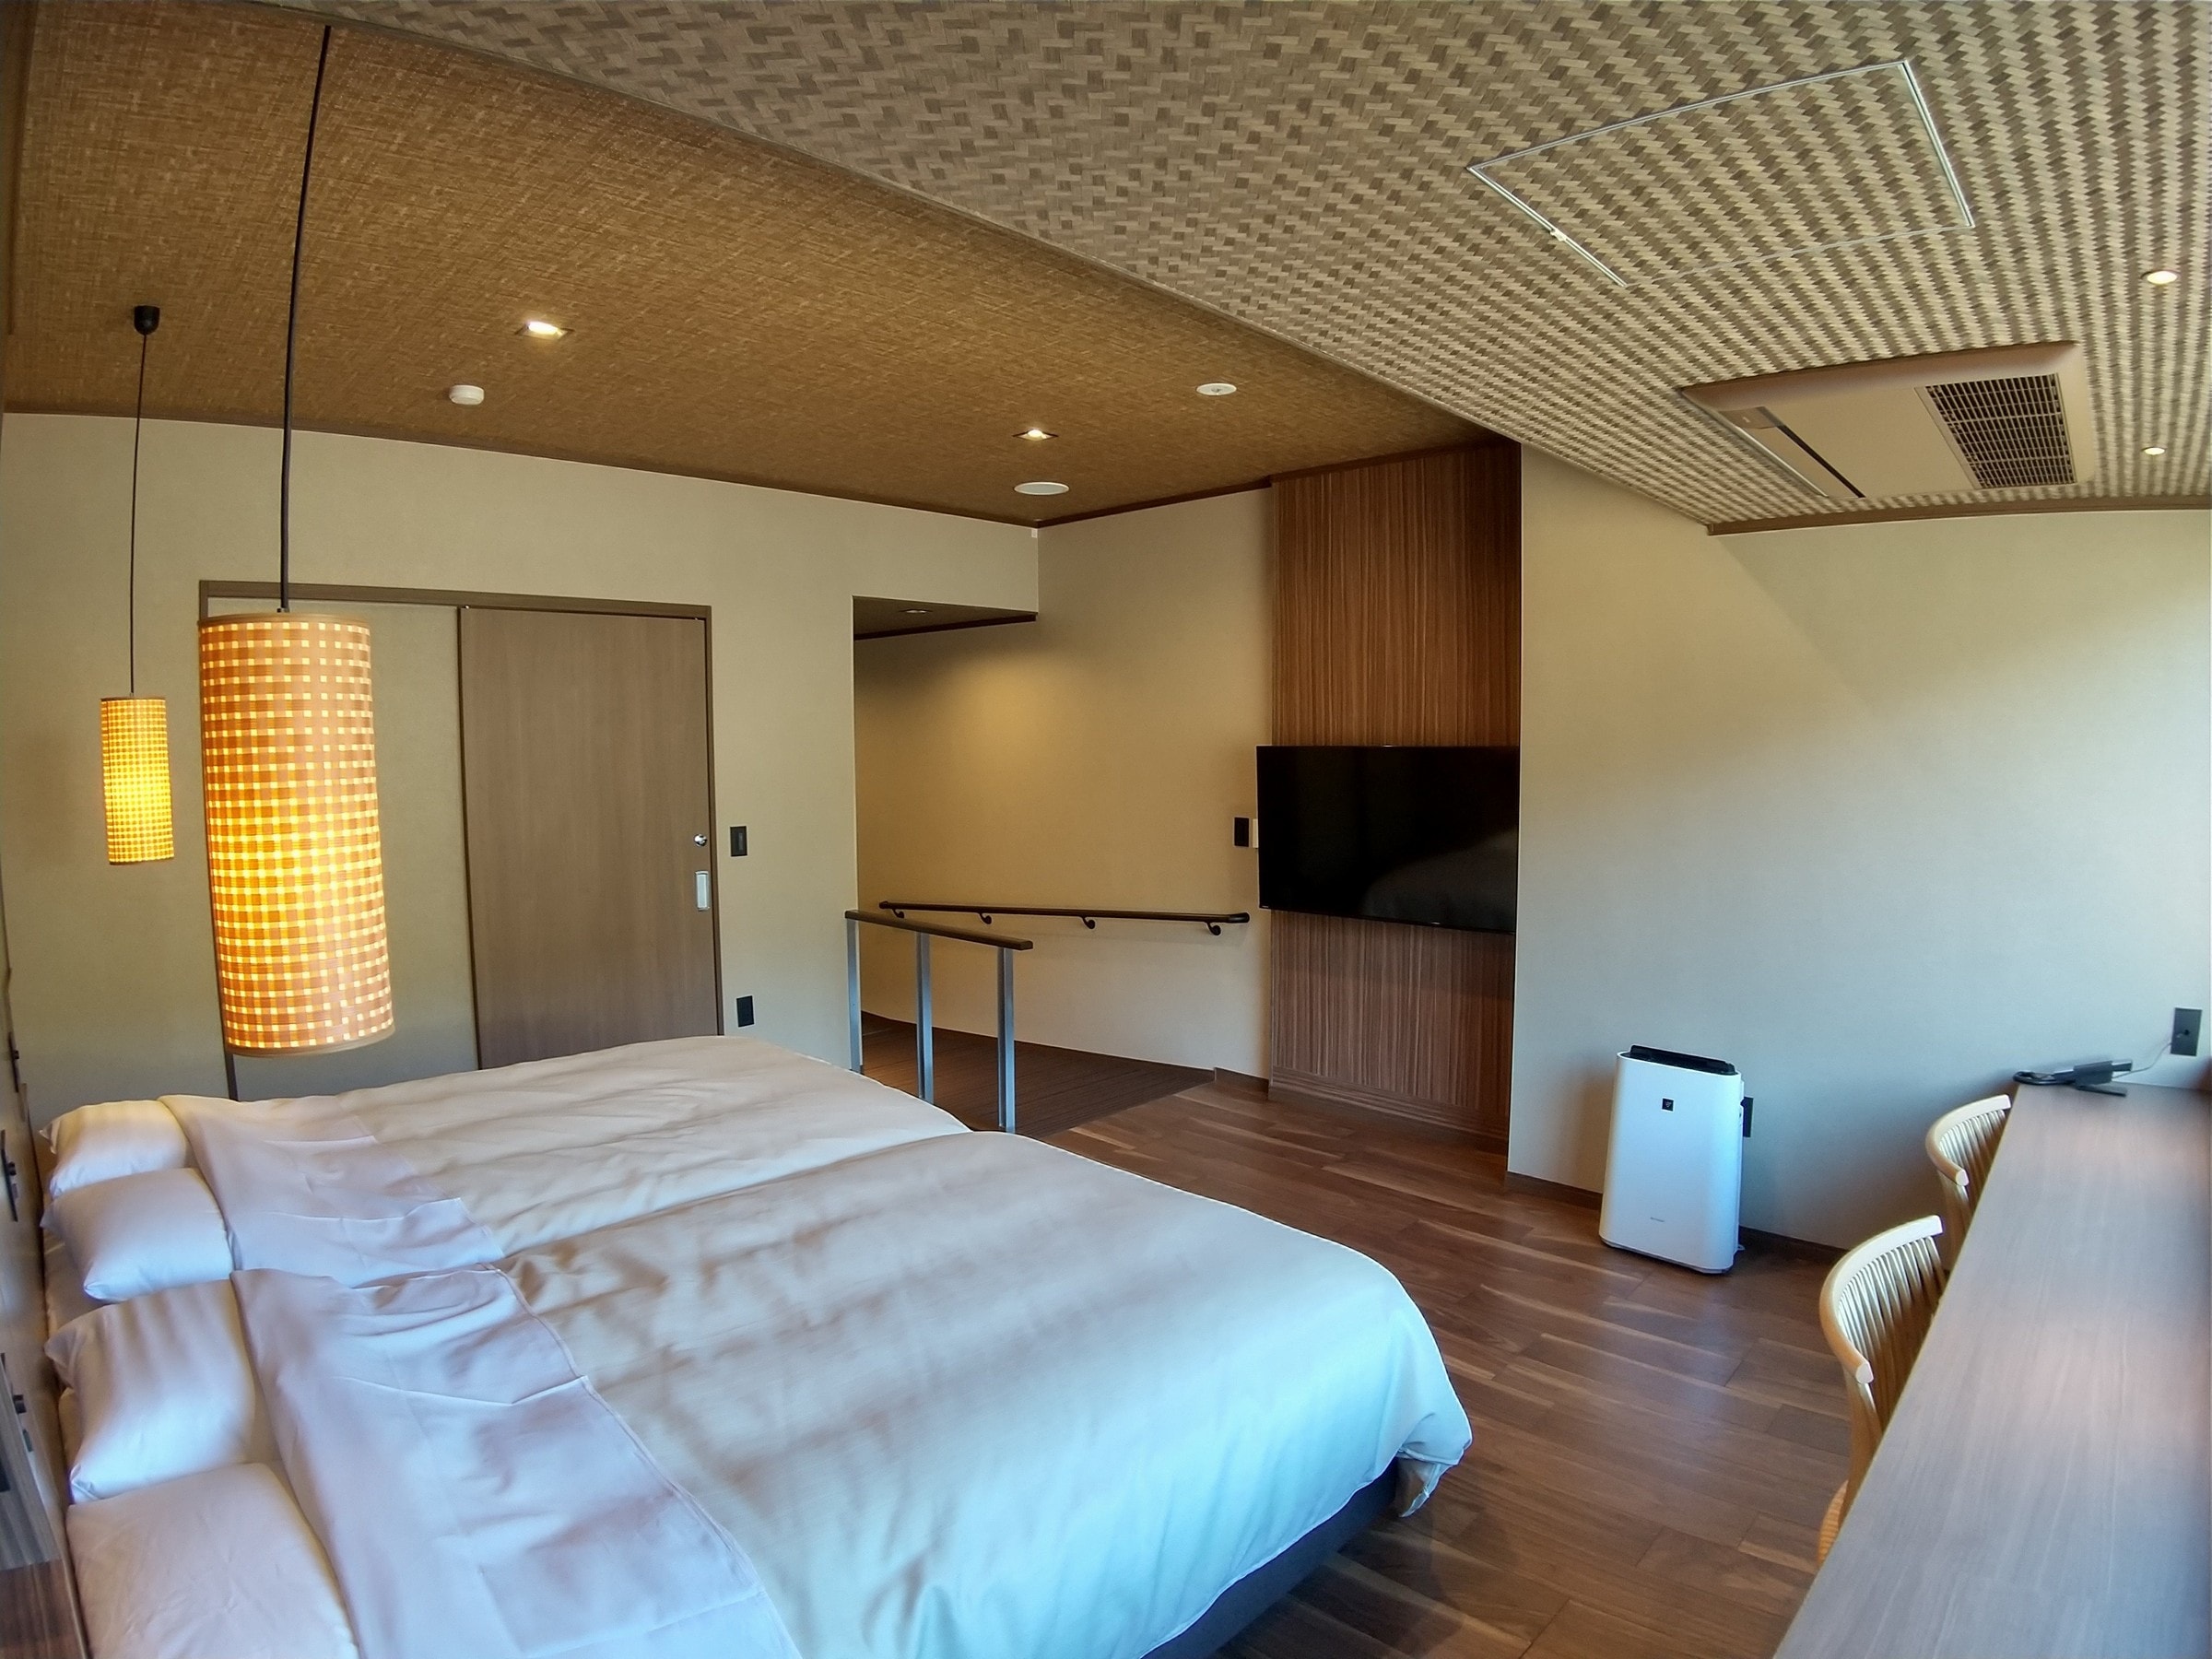 A 30m2 Western-style room renewed in March 2021. A compact room with a good view for 2 people only.